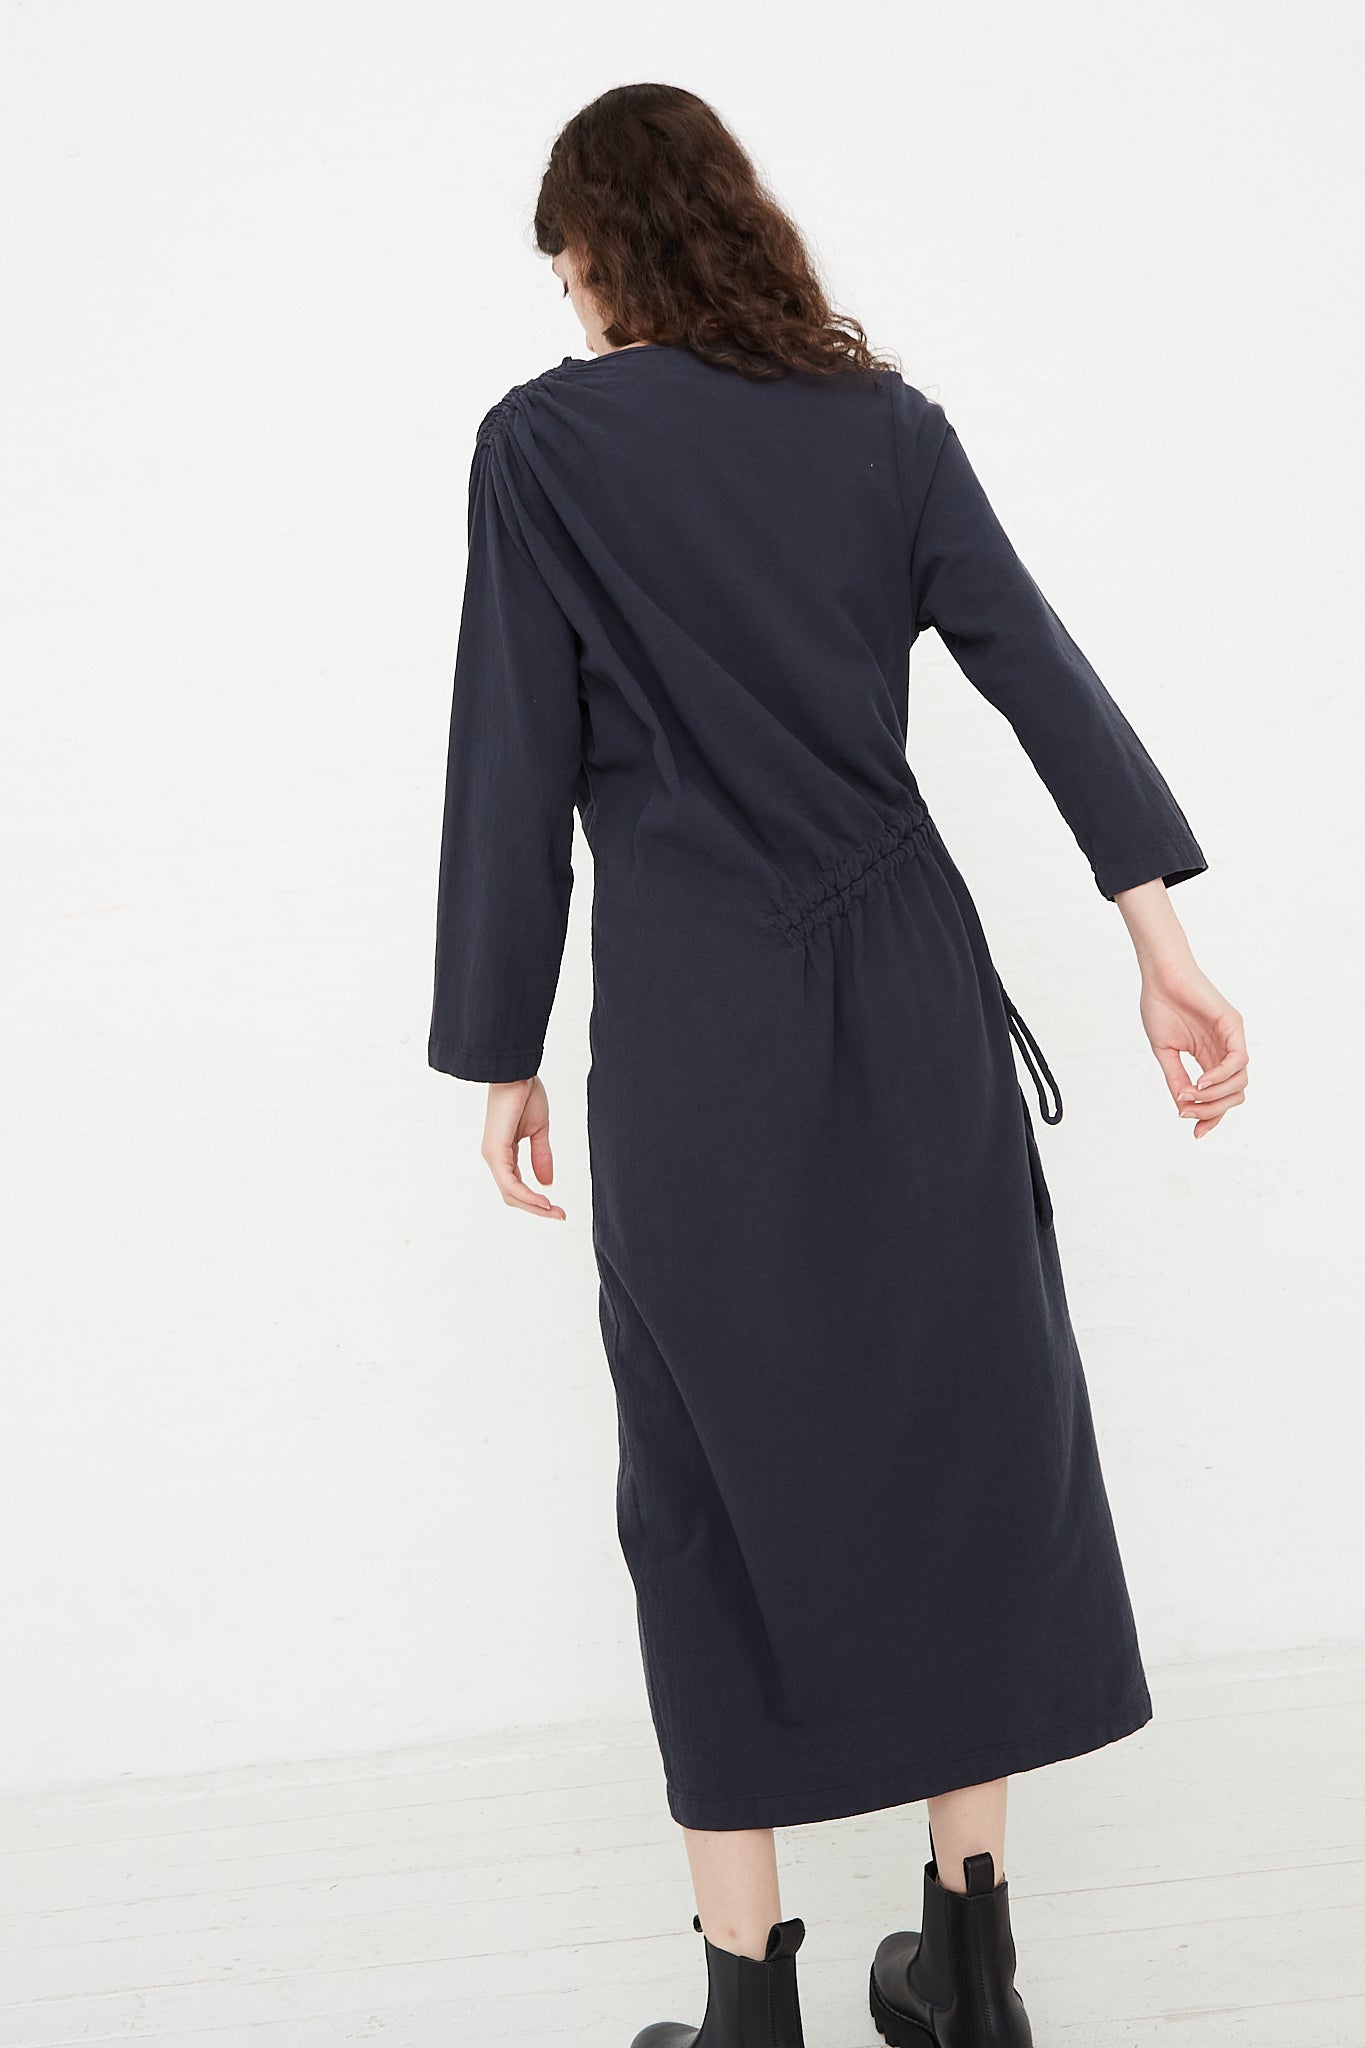 Cotton Woven Ruched Dress in Dark Navy by Black Crane for Oroboro Back